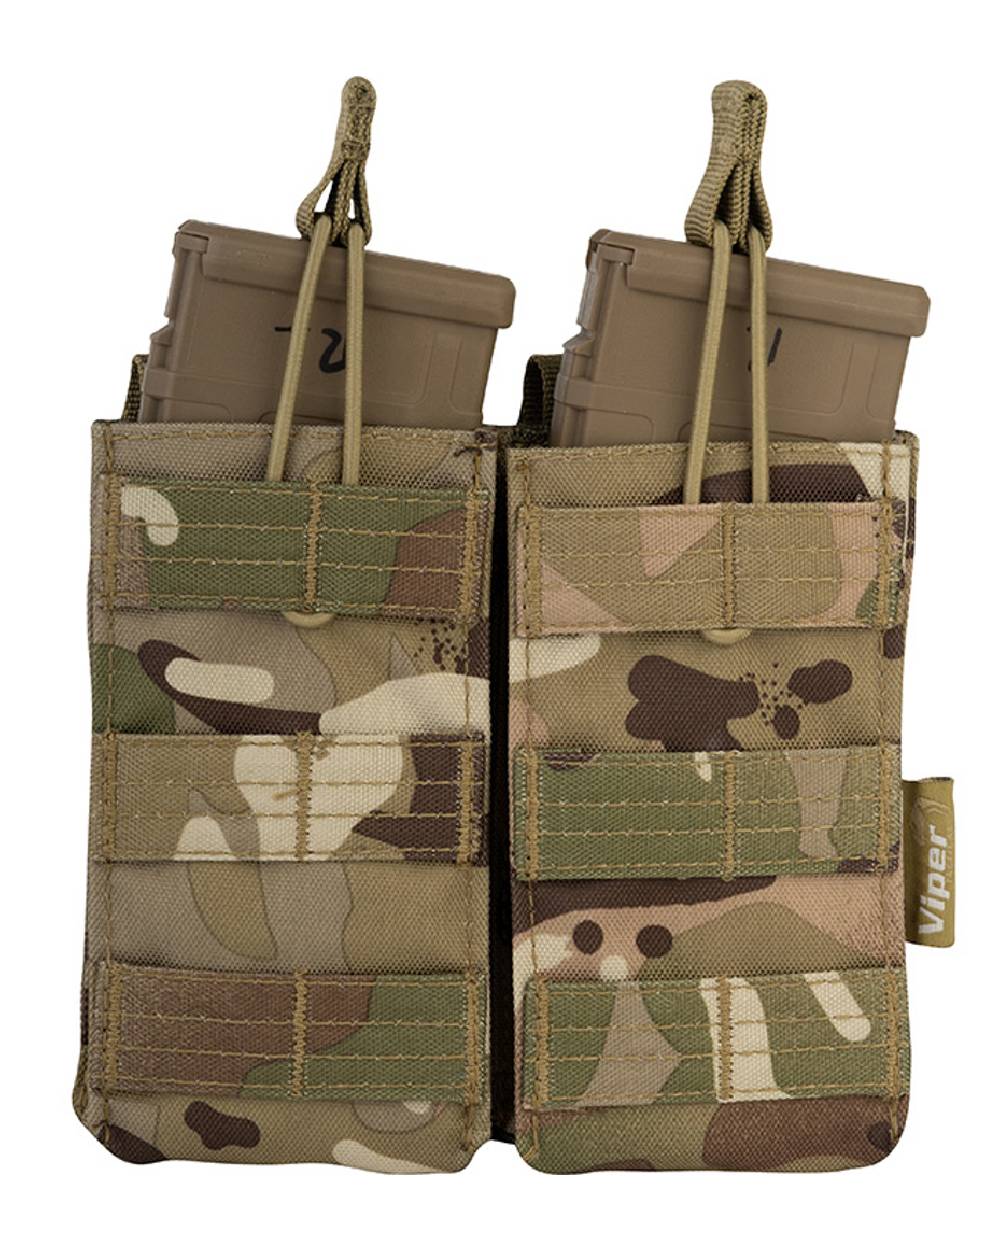 Viper Quick Release Double Mag Pouch in VCAM 